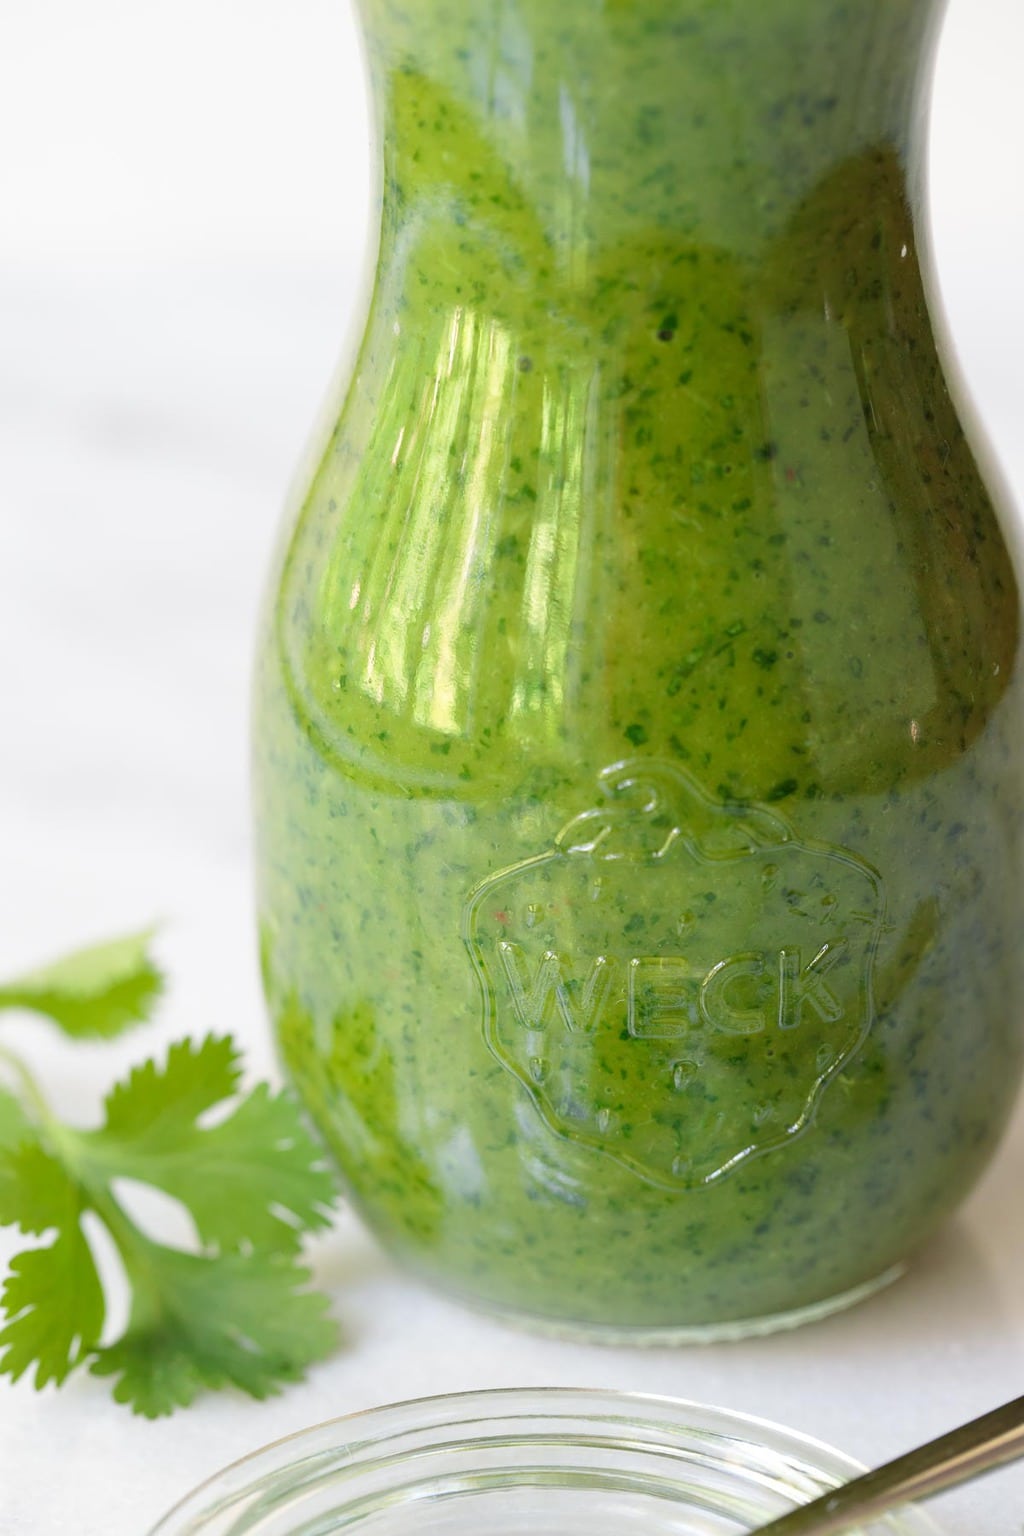 Photo of a glass jar of Lemongrass Cilantro Salad Dressing with a spoonful of the sauce in the foreground.